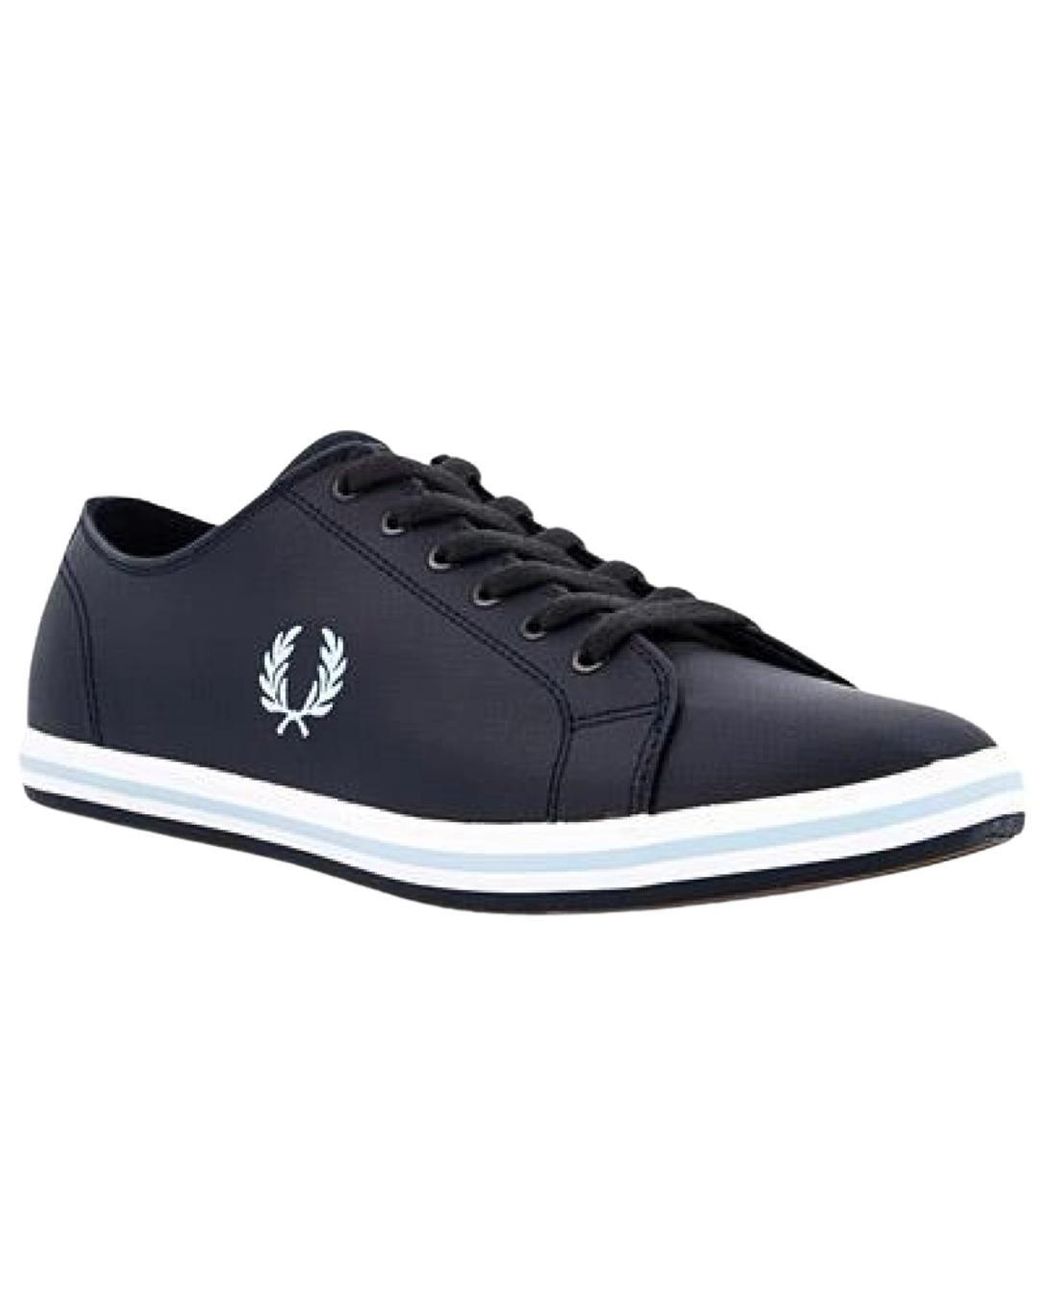 Fred Perry Kingston Leather B7163 608 Navy Blue Trainers for Men | Lyst